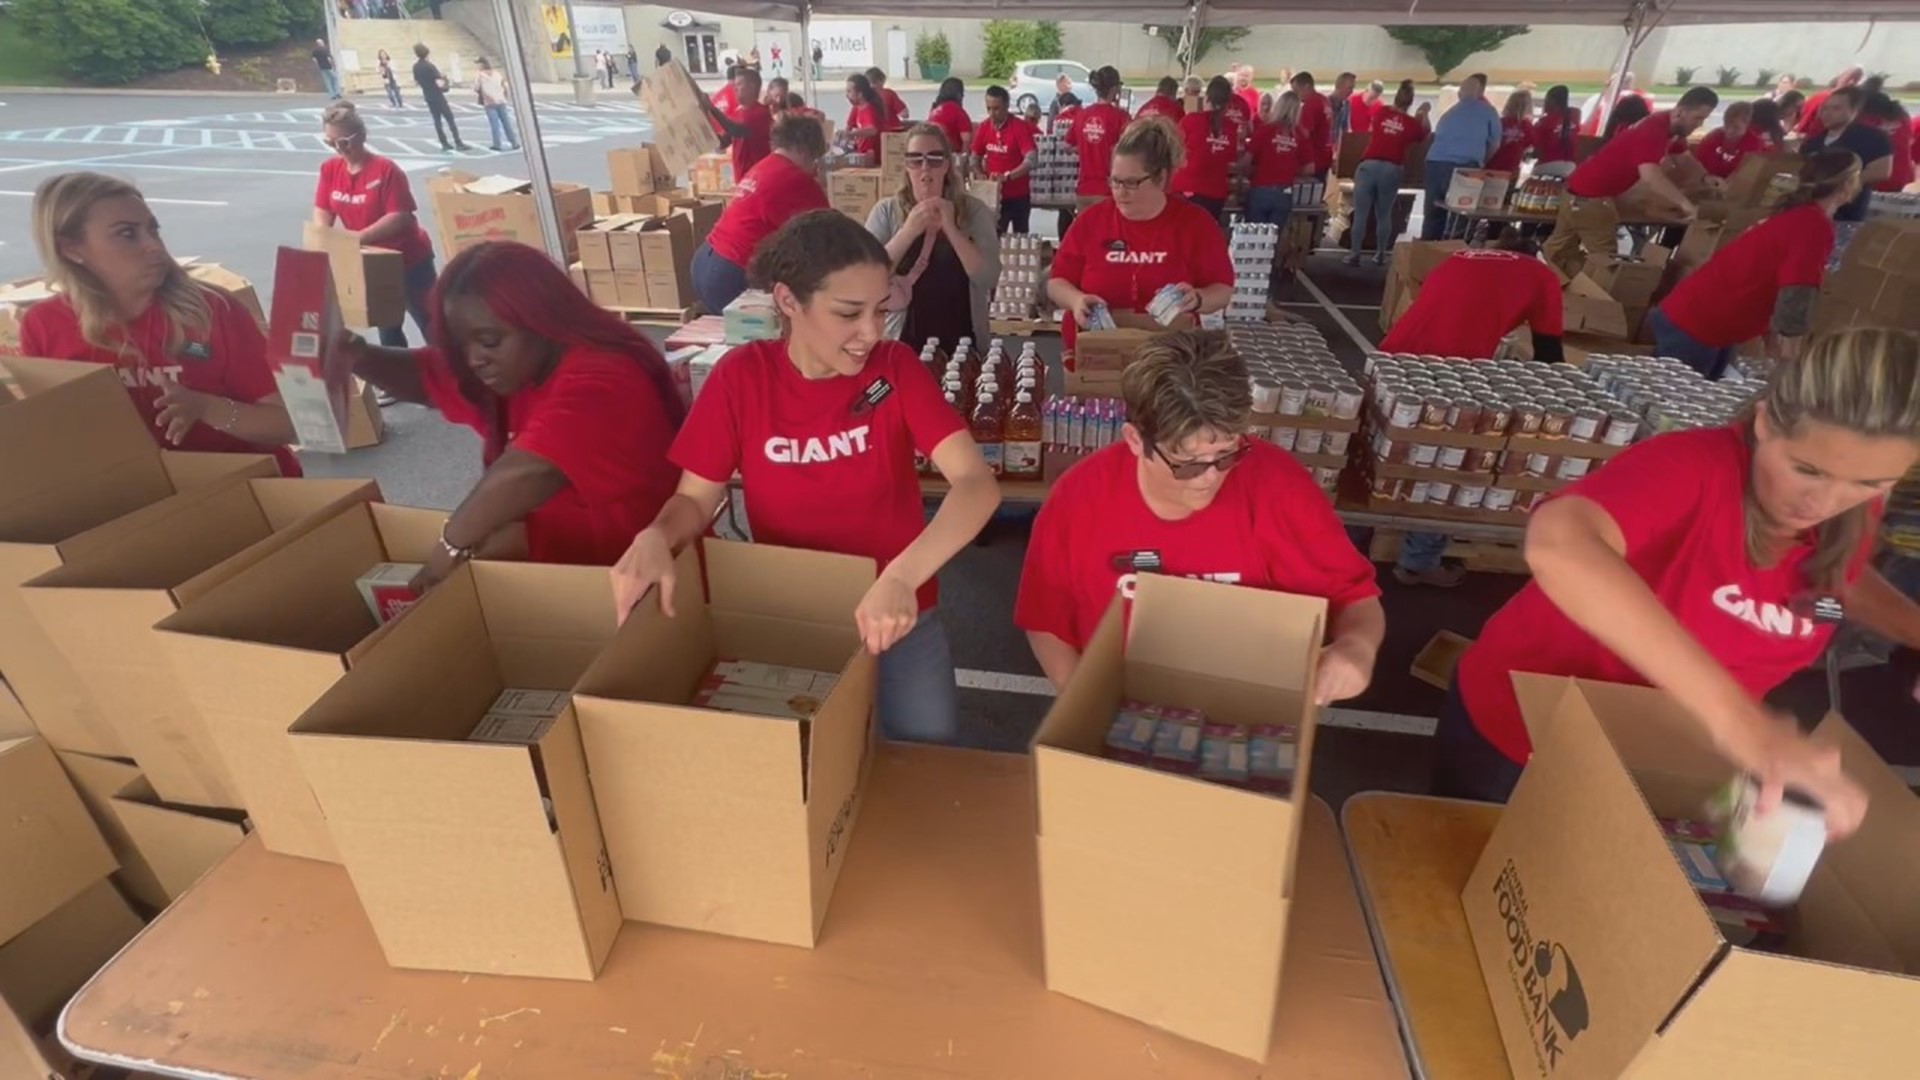 Hundreds of volunteers helped deliver thousands of meals to veterans and their families during a packing party in Dauphin County.